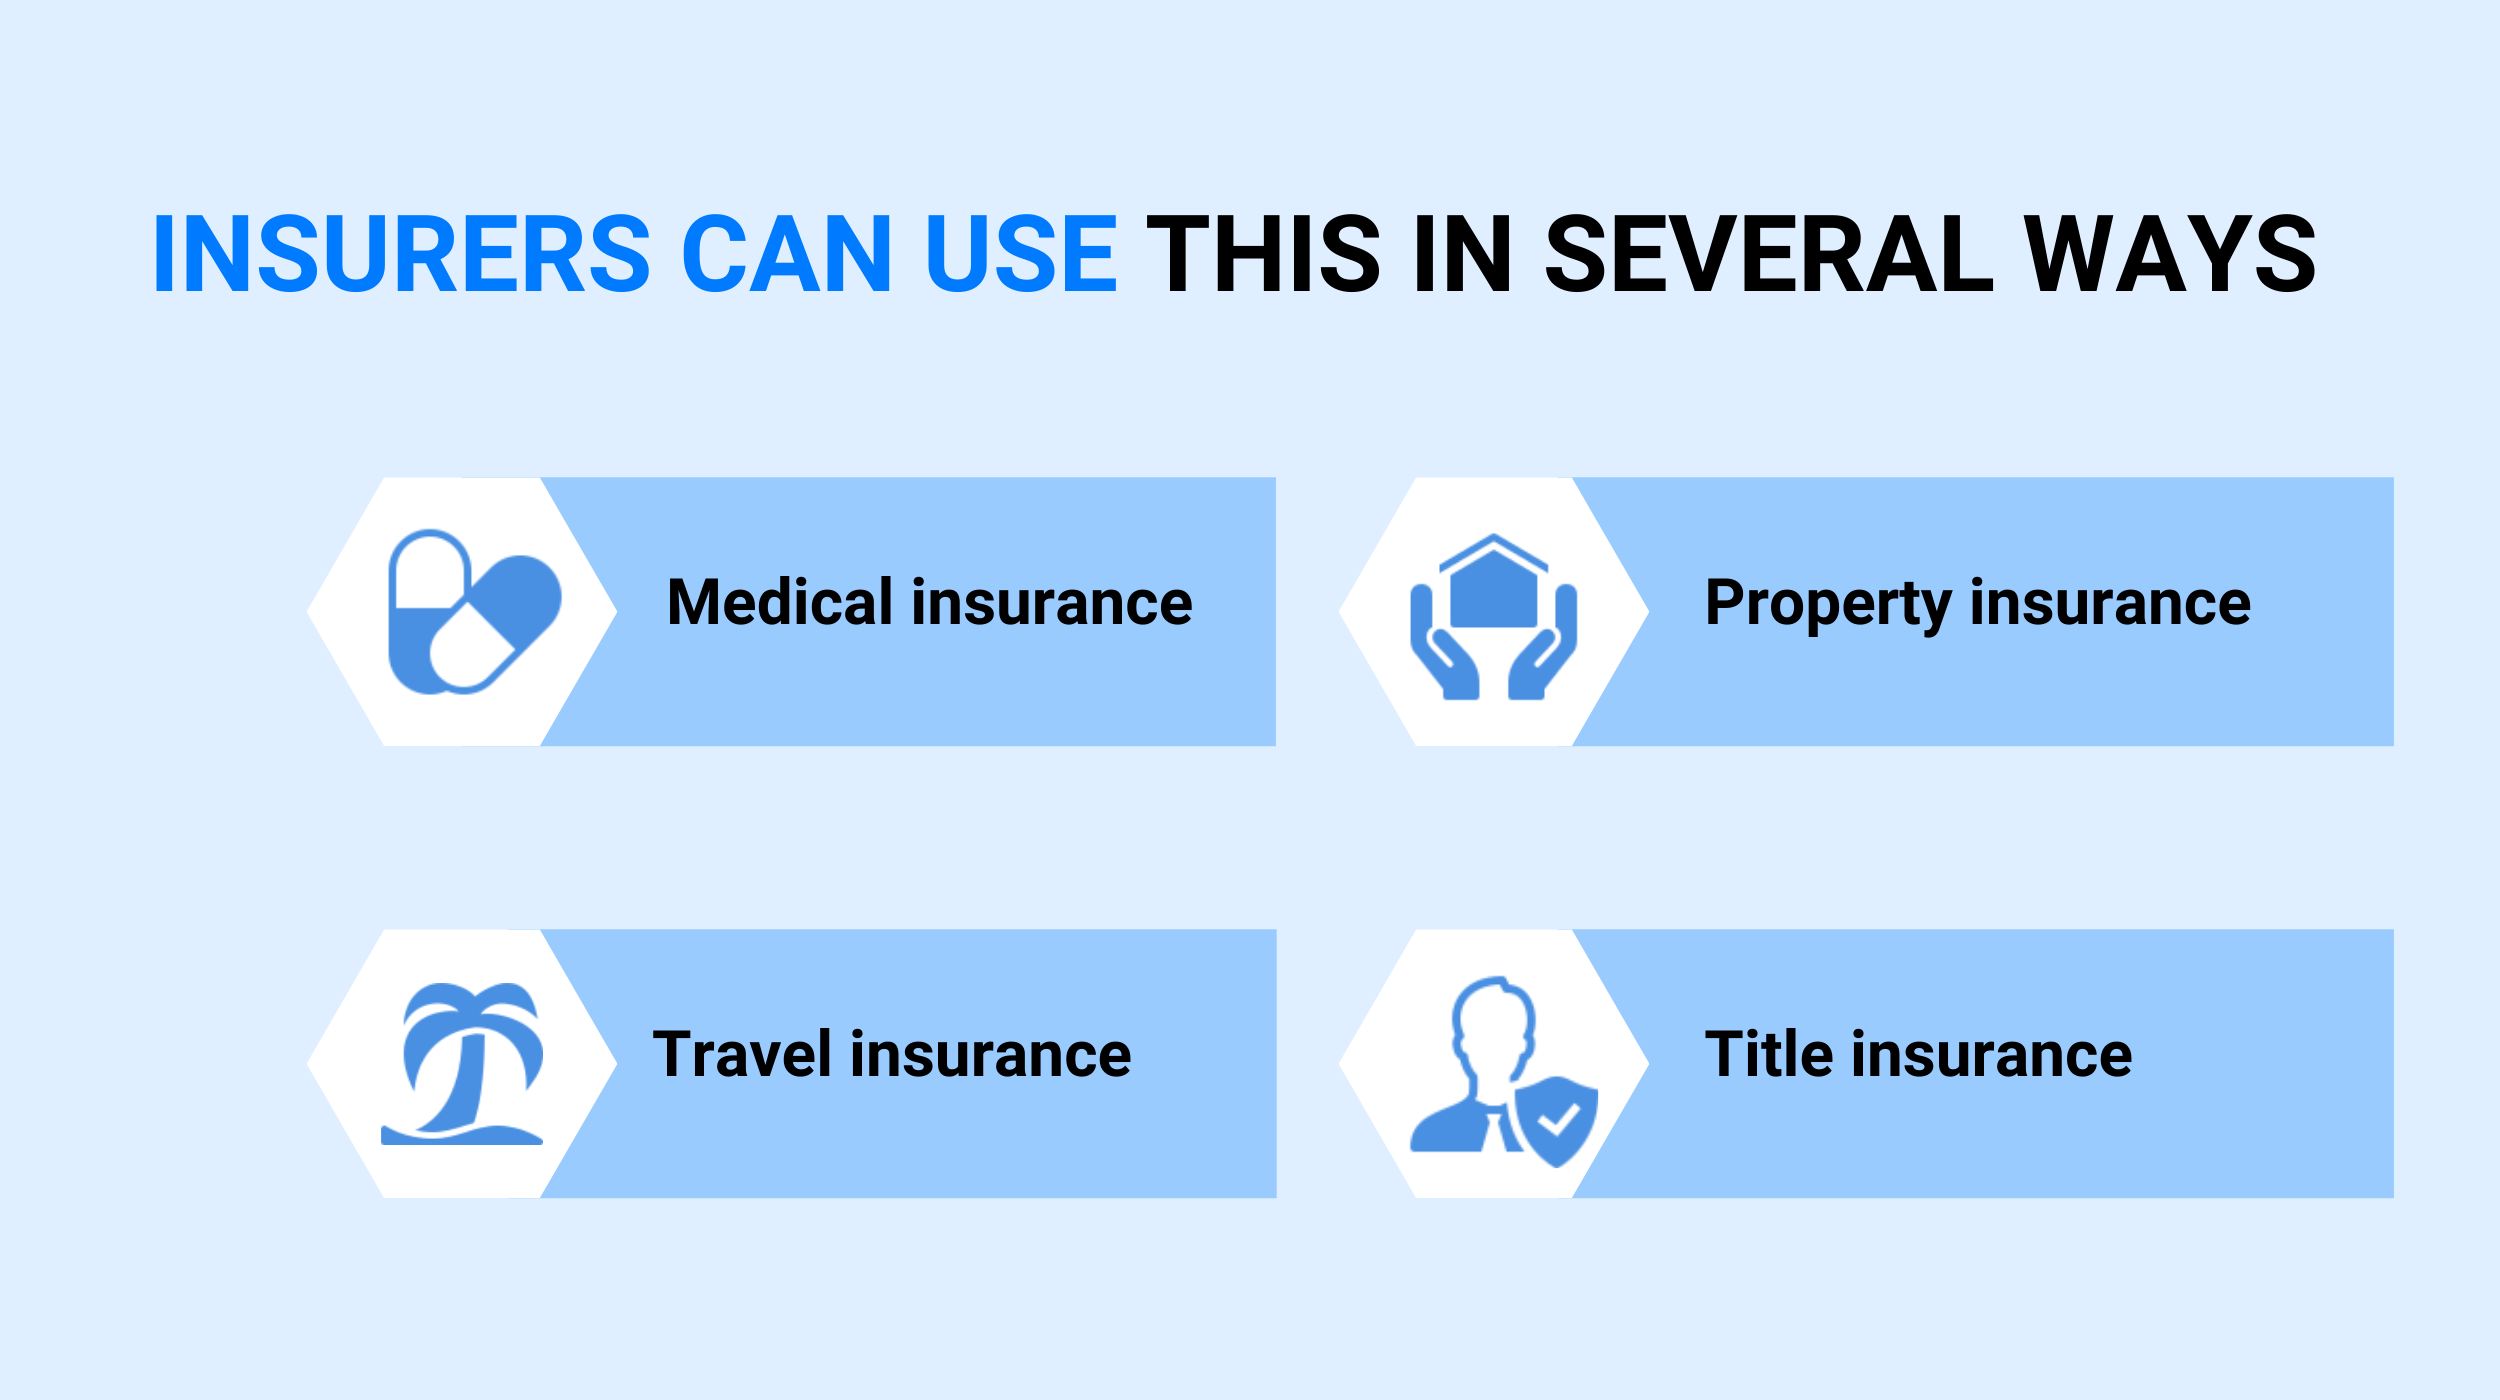 Insurers can use this in several ways